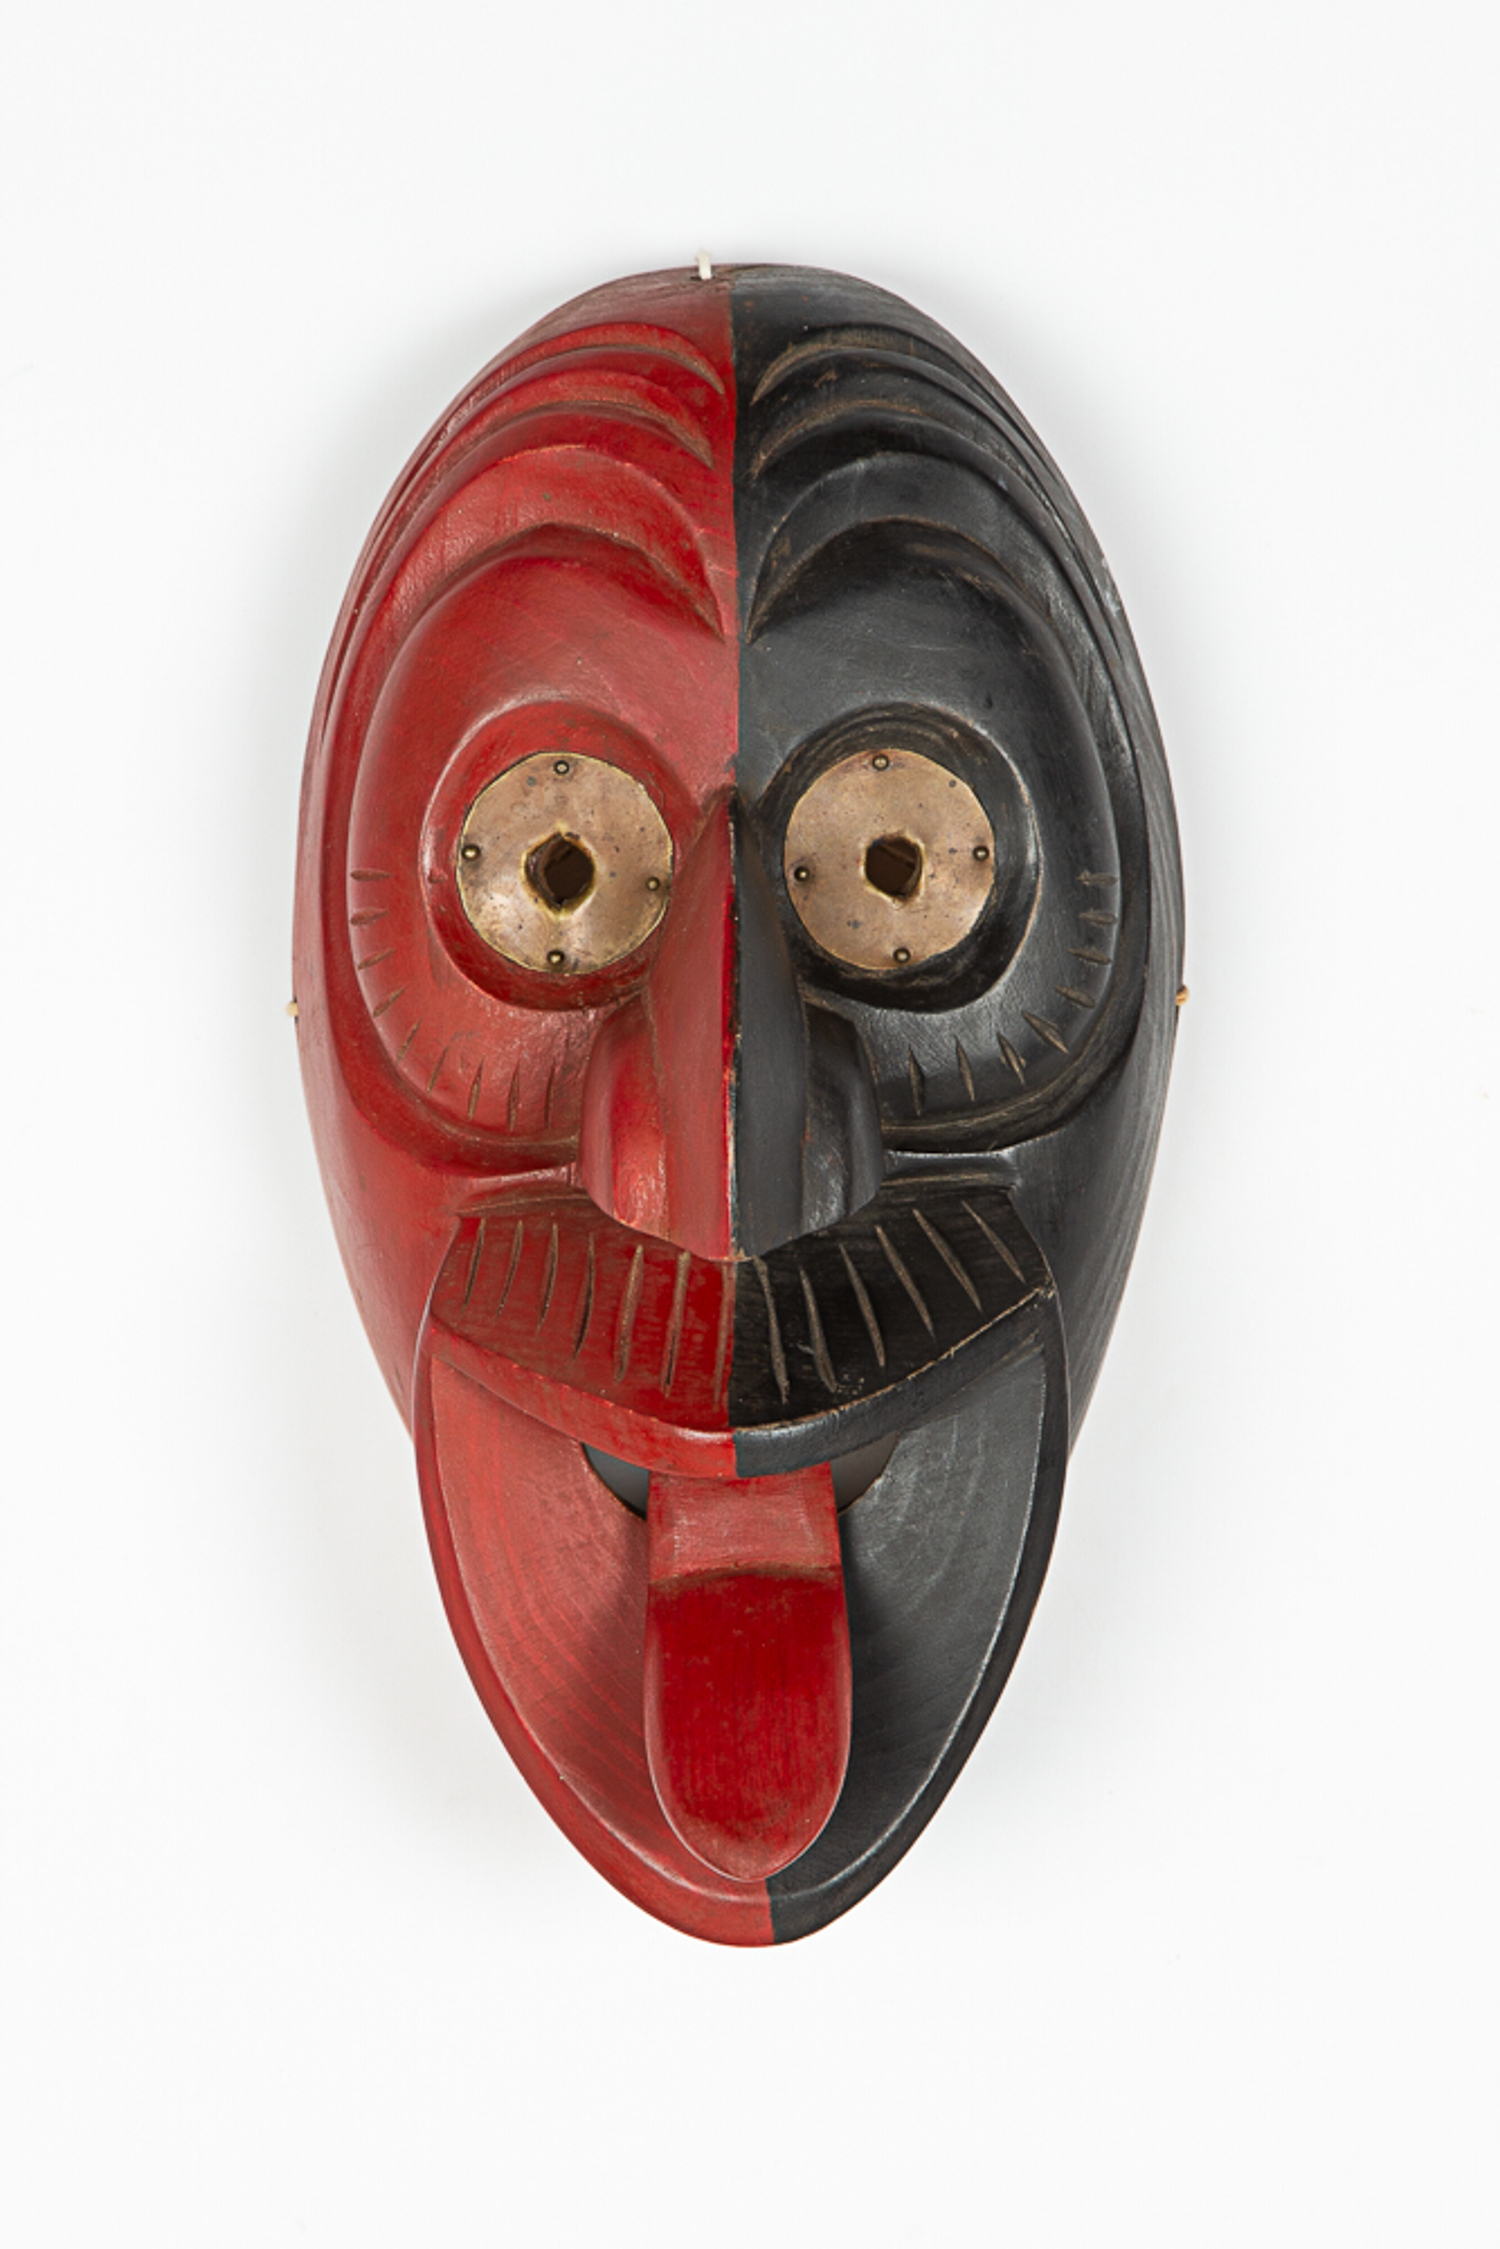 NATIVE AMERICAN CRAFTS MASK 20th century.